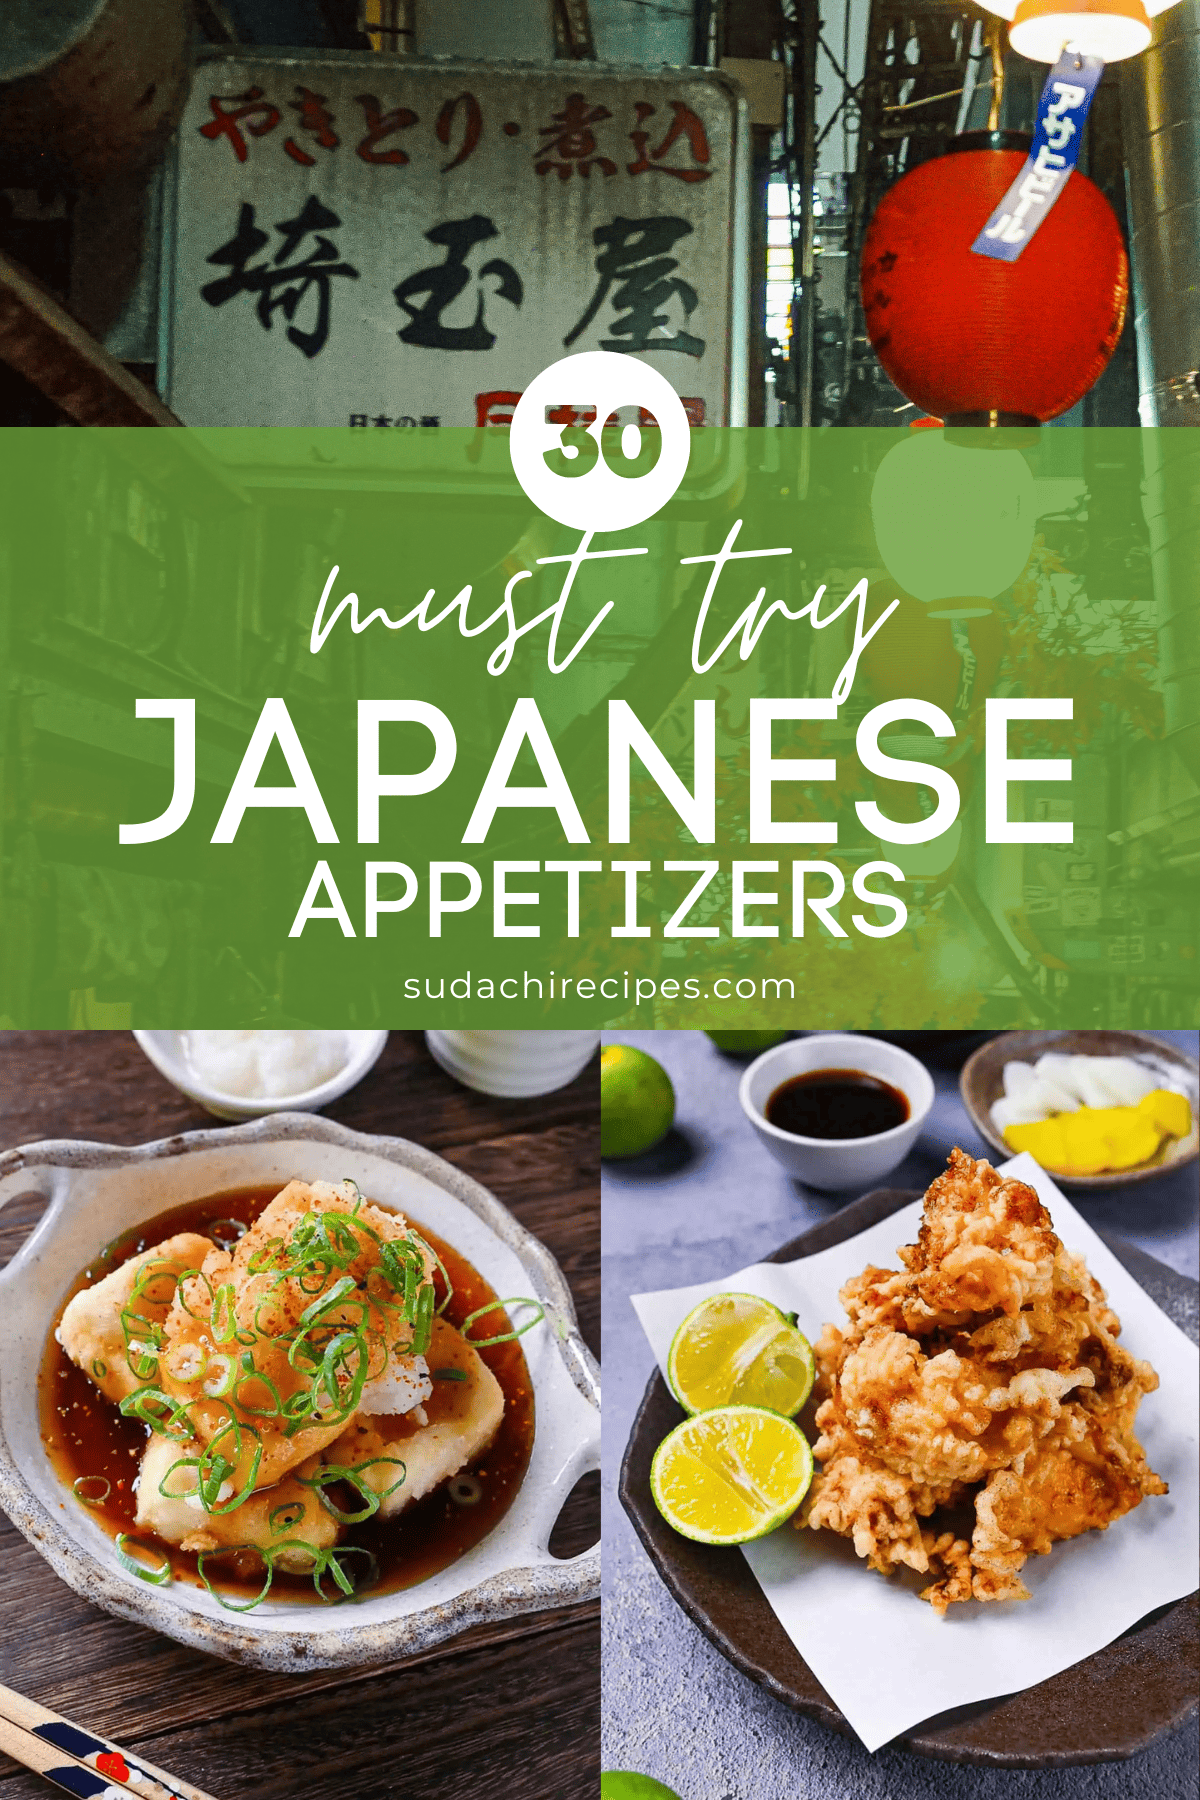 Japanese appetizers Recipes